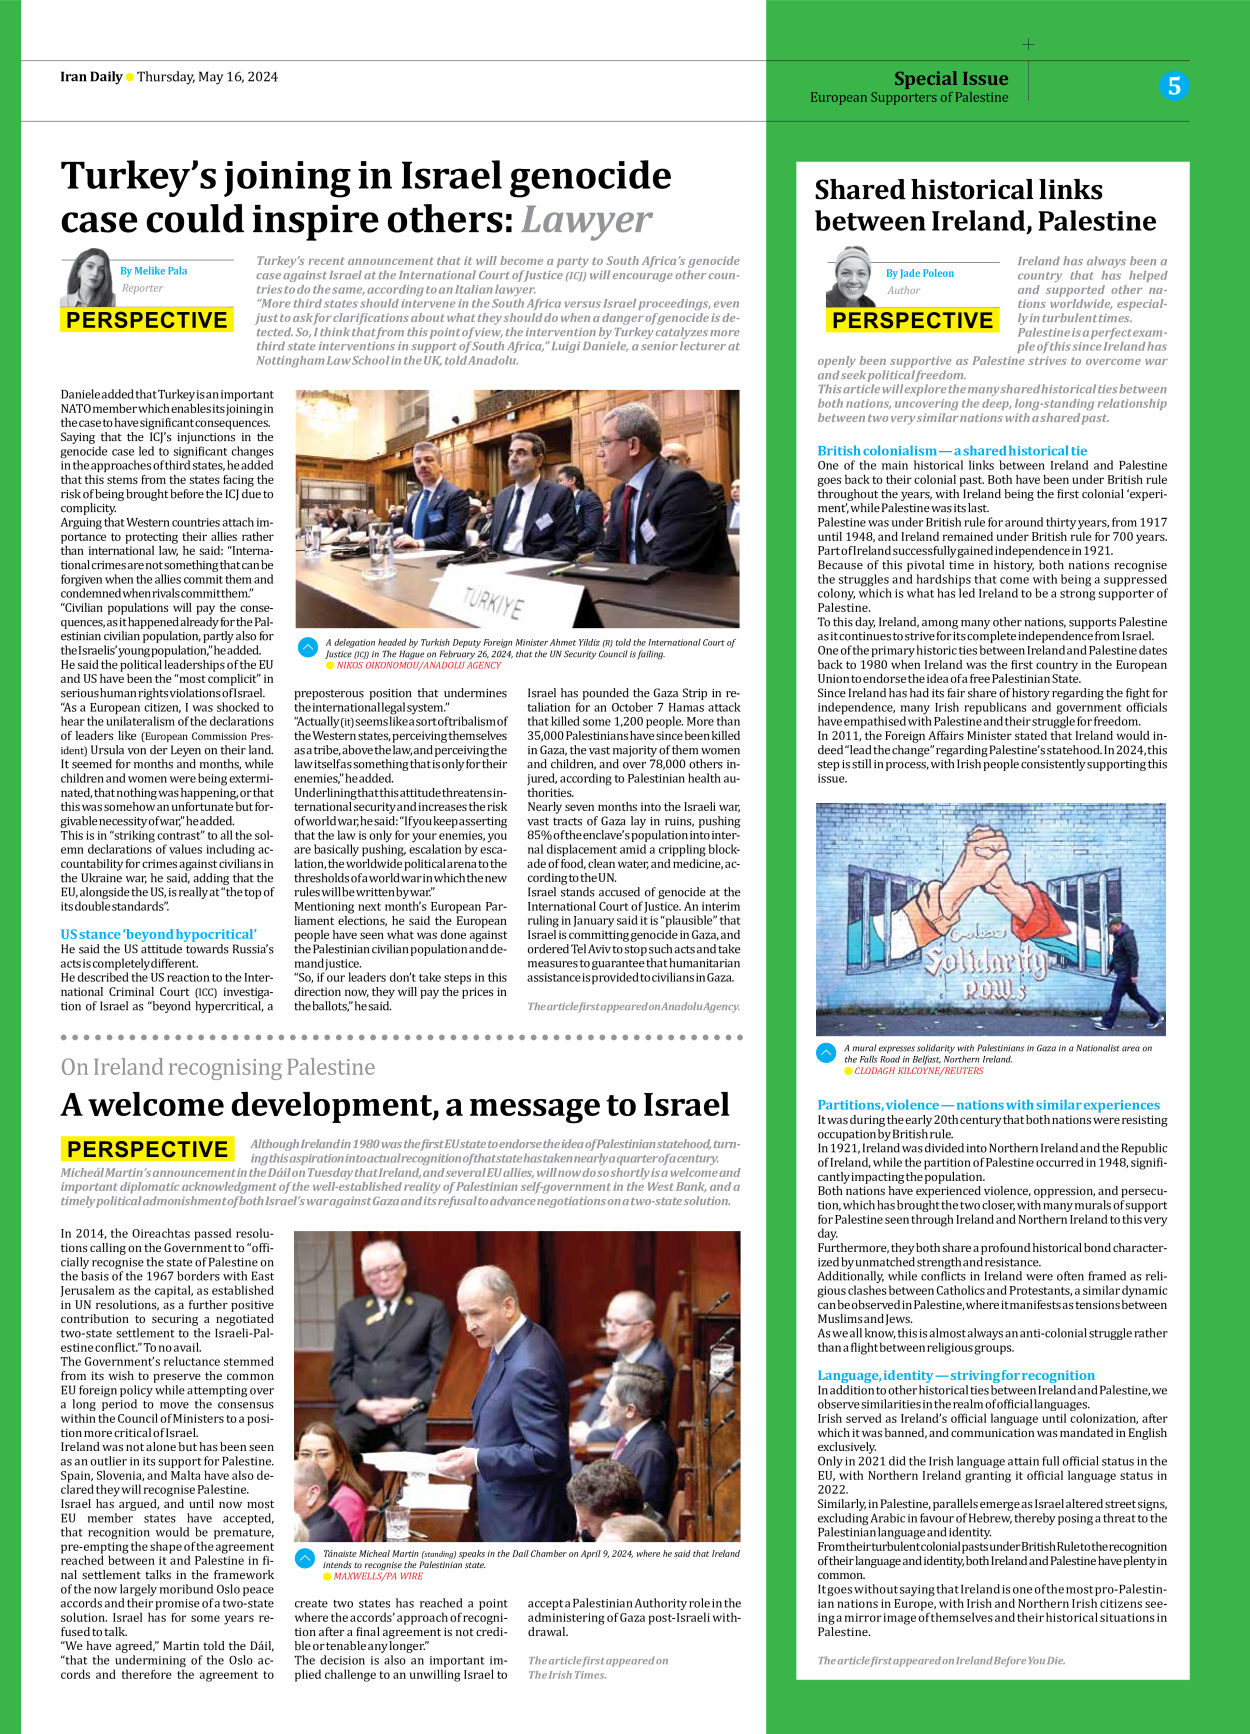 Iran Daily - Number Seven Thousand Five Hundred and Fifty Nine - 16 May 2024 - Page 5